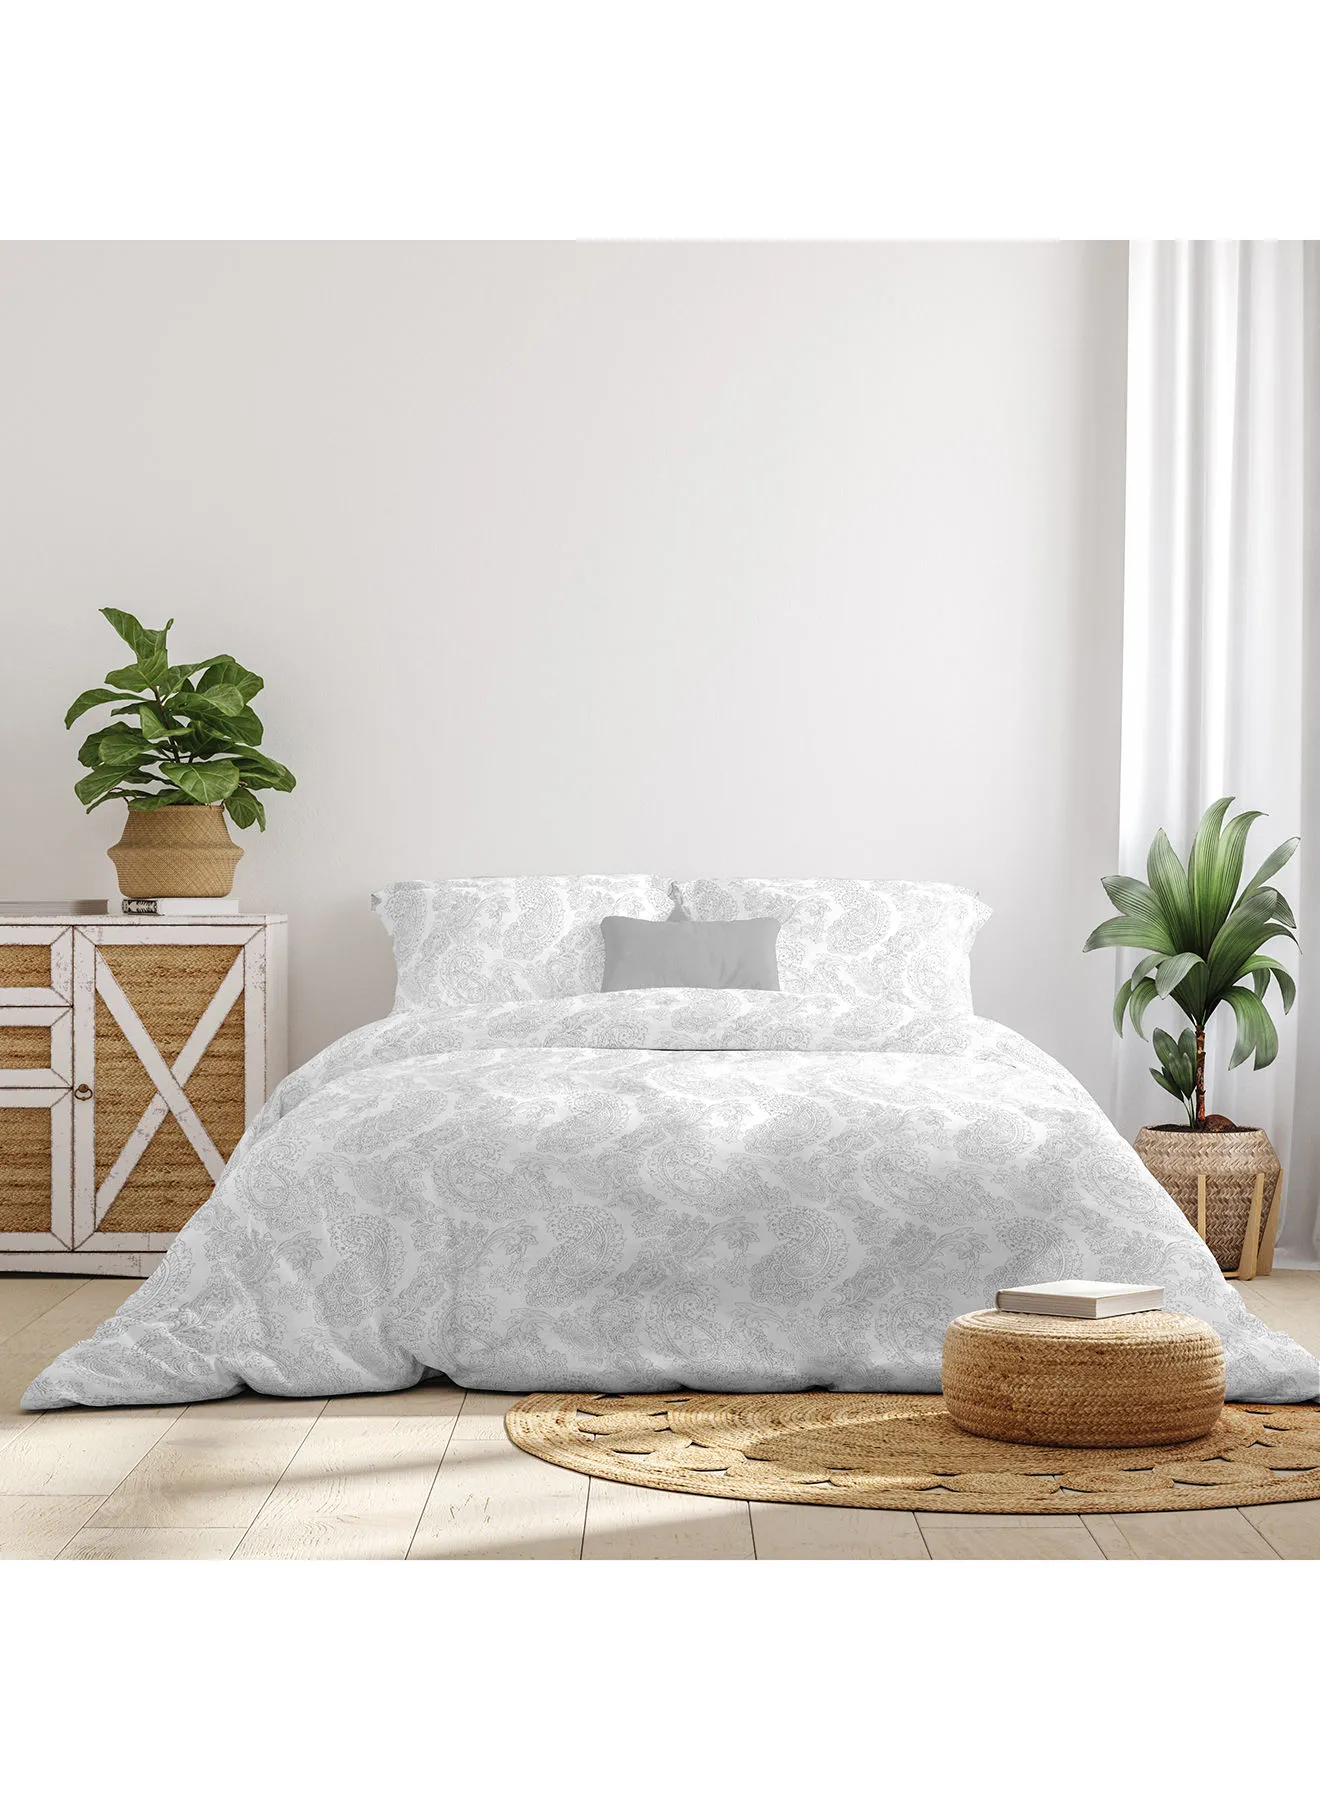 Amal Comforter Set Queen Size All Season Everyday Use Bedding Set 100% Cotton 3 Pieces 1 Comforter 2 Pillow Covers  White/Light Grey